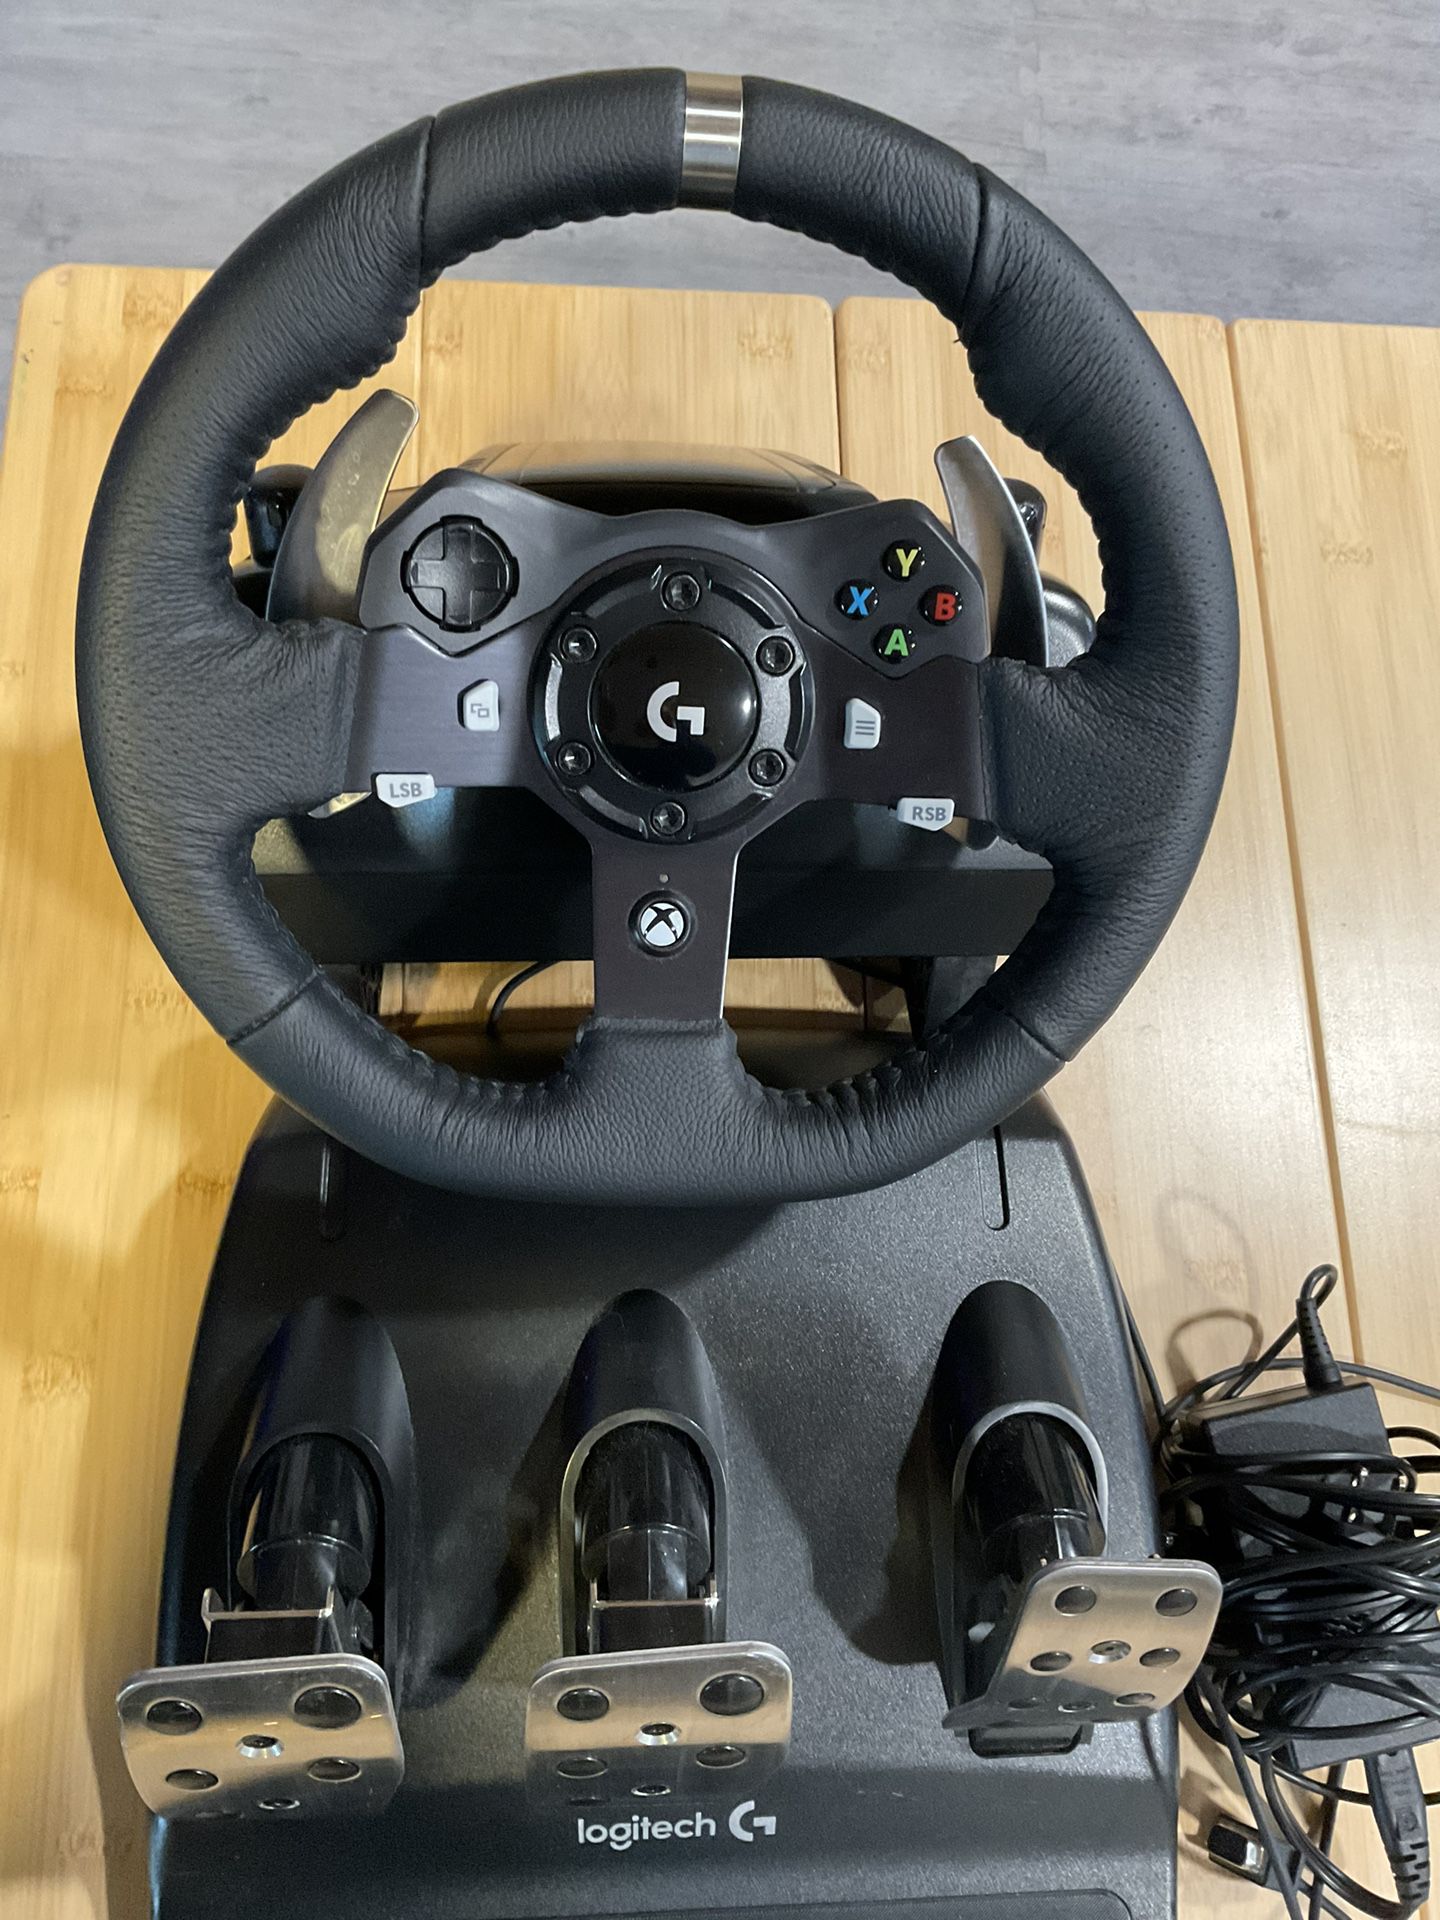 Logitech G920 Driving Force Steering Wheel And Pedals.